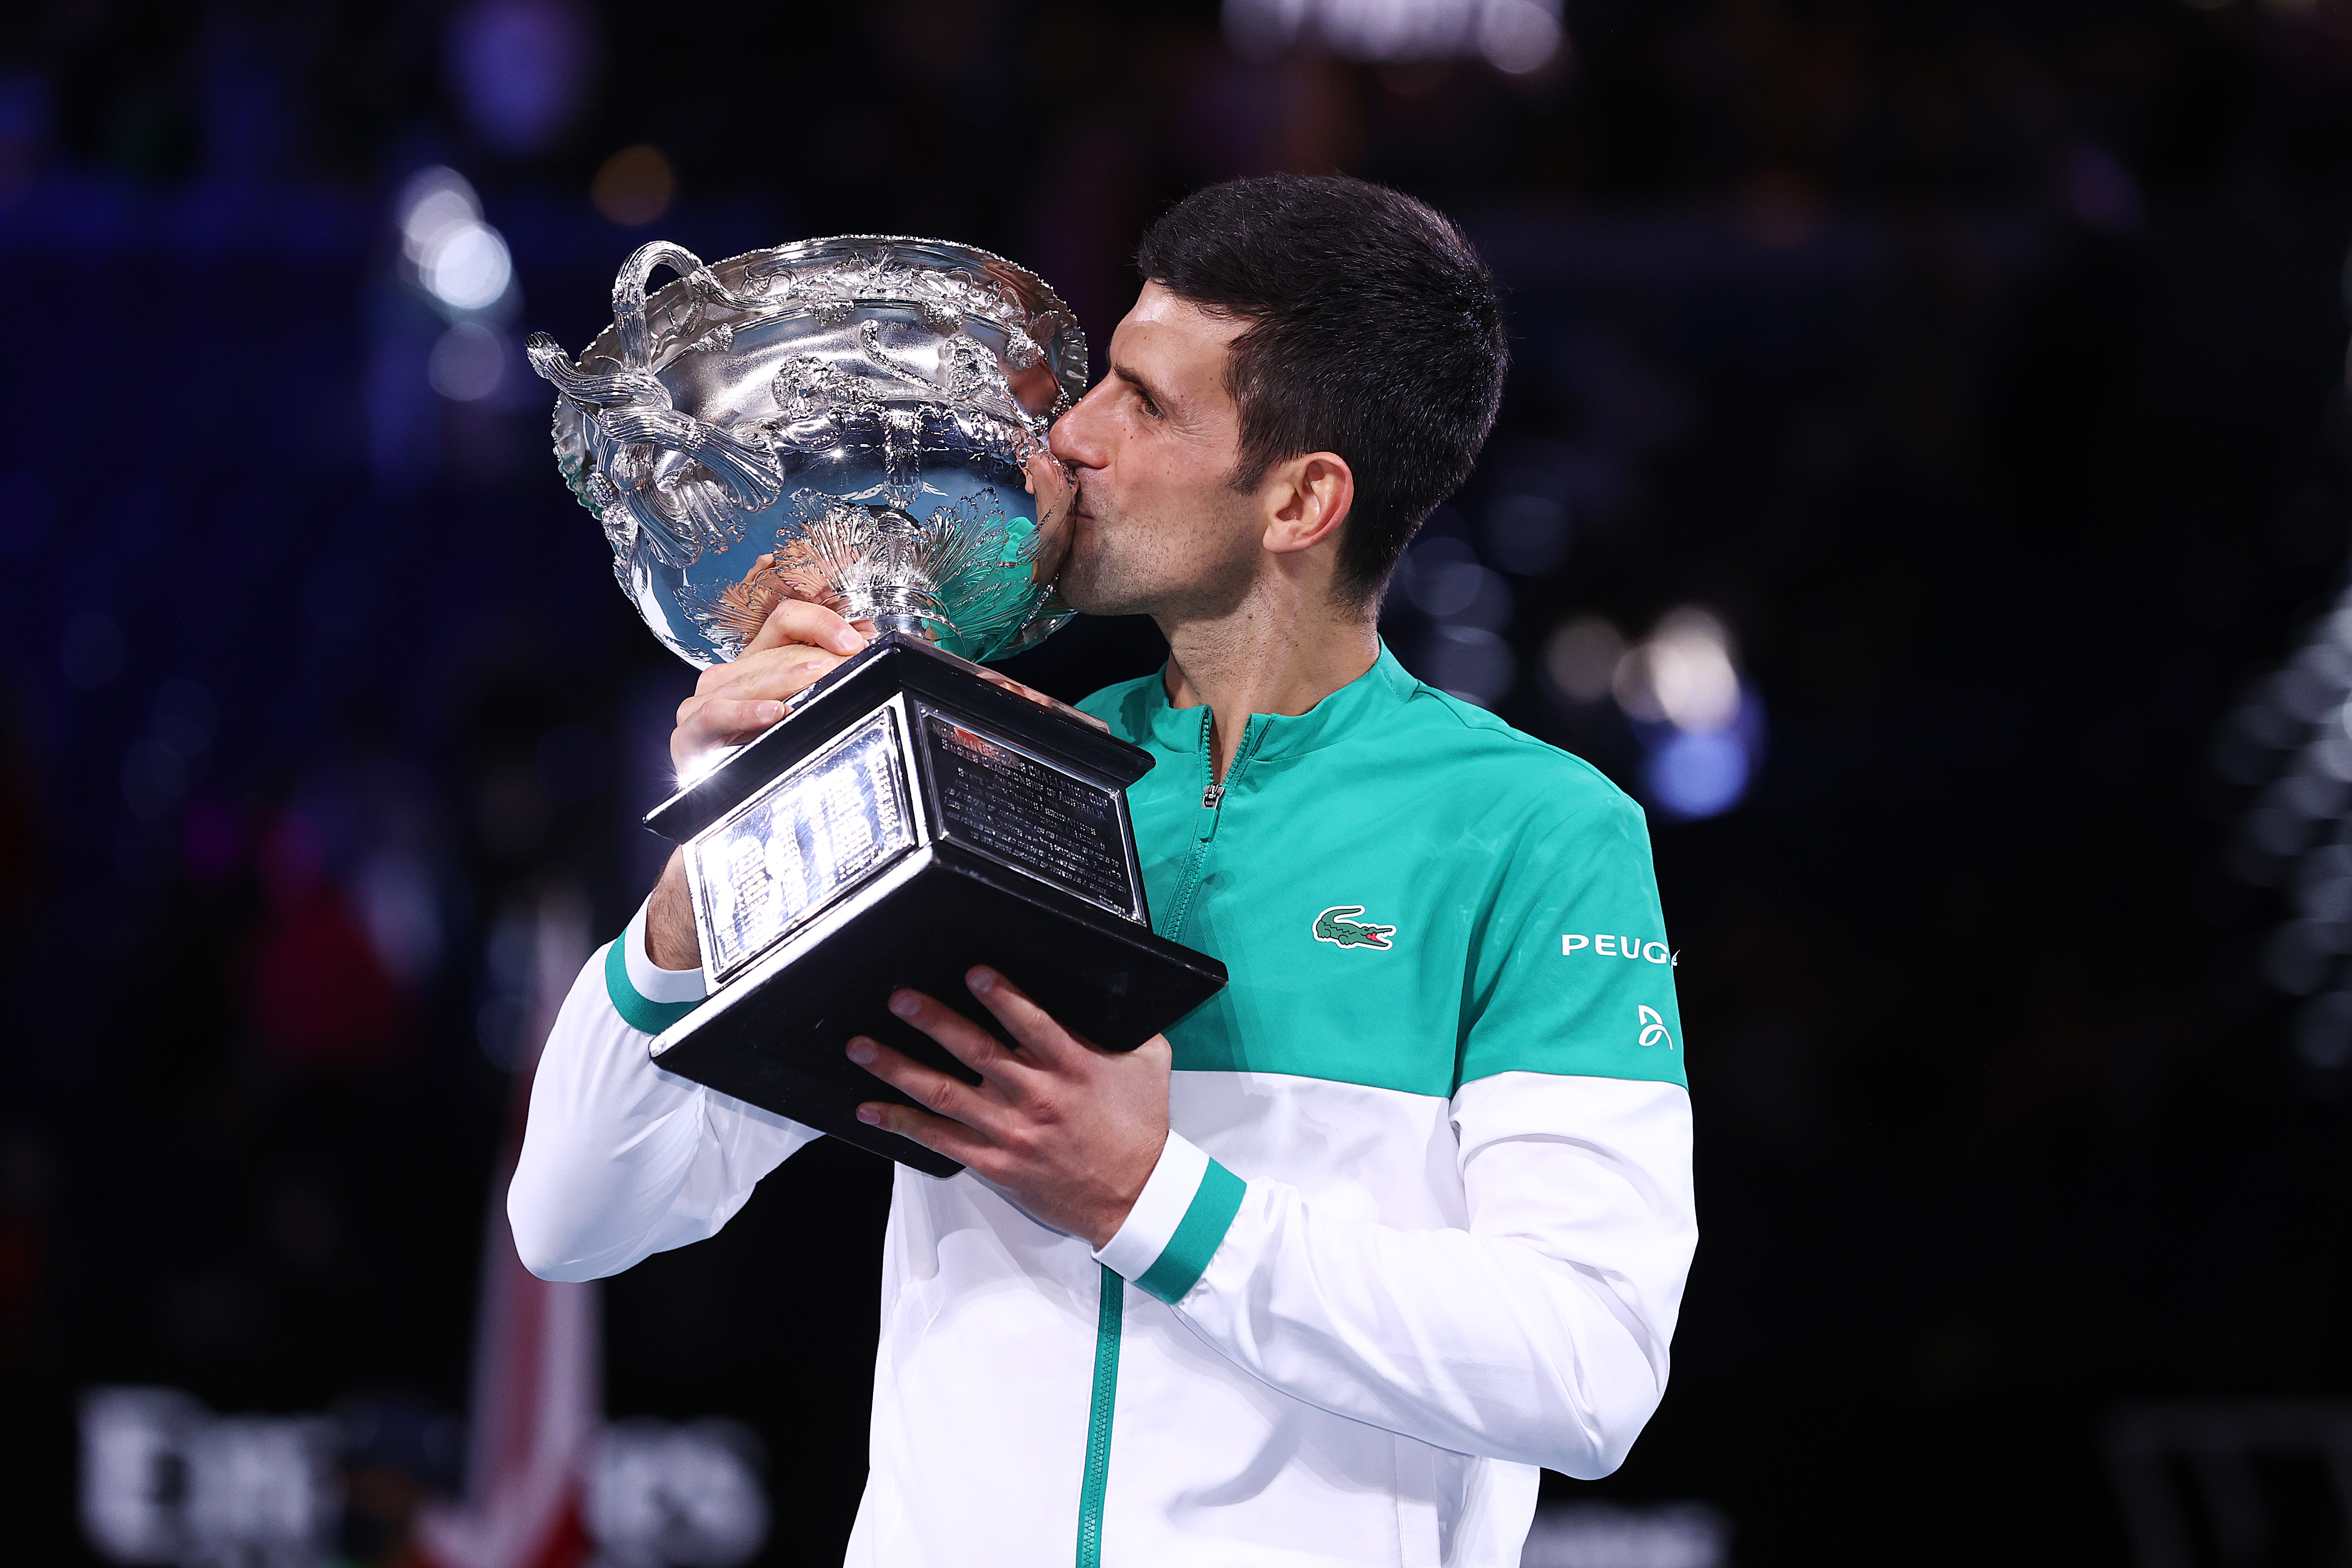 Novak Djokovic of Serbia holds the Norman Brookes Challenge Cup as he celebrates victory in his Men’s Singles Final match against Daniil Medvedev of Russia during day 14 of the 2021 Australian Open at Melbourne Park on February 21, 2021 in Melbourne, Australia. 